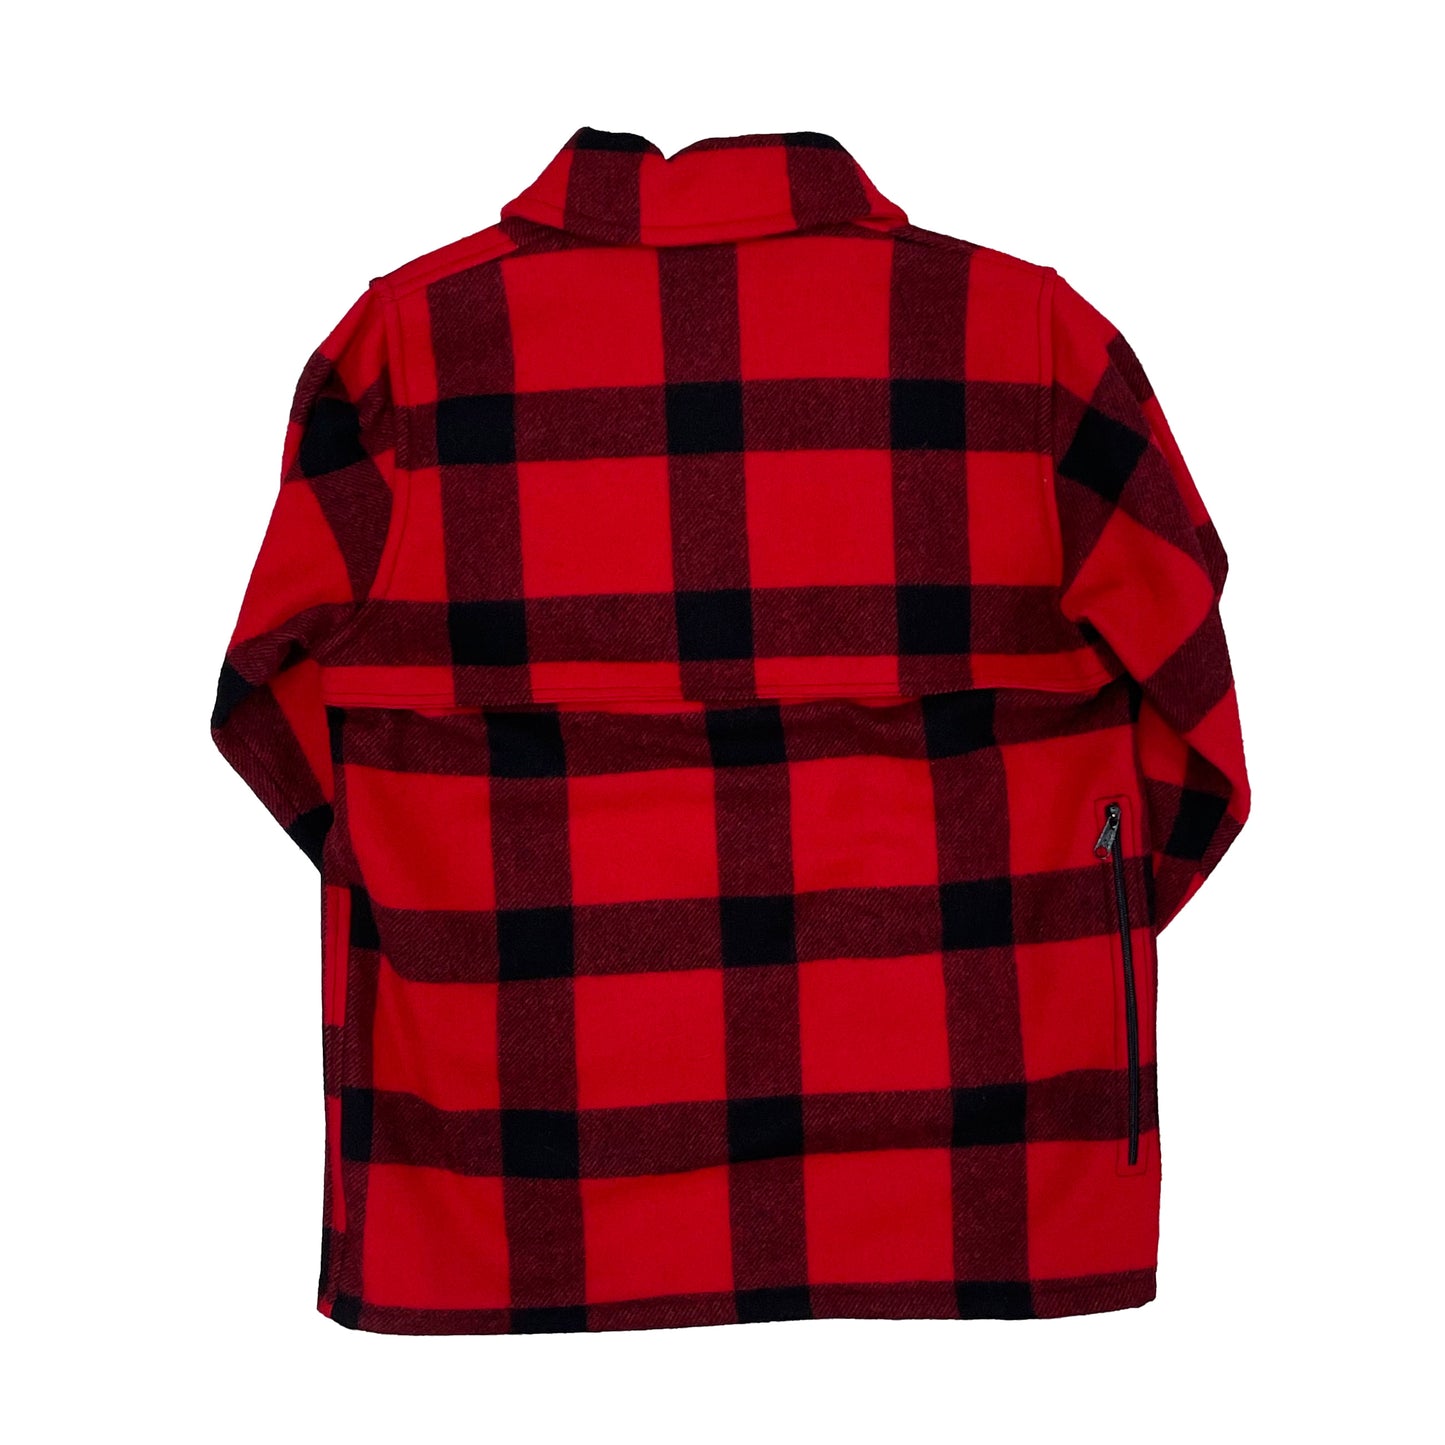 Johnson Woolen Mills Cruiser jacket in Red and black buffalo check back view